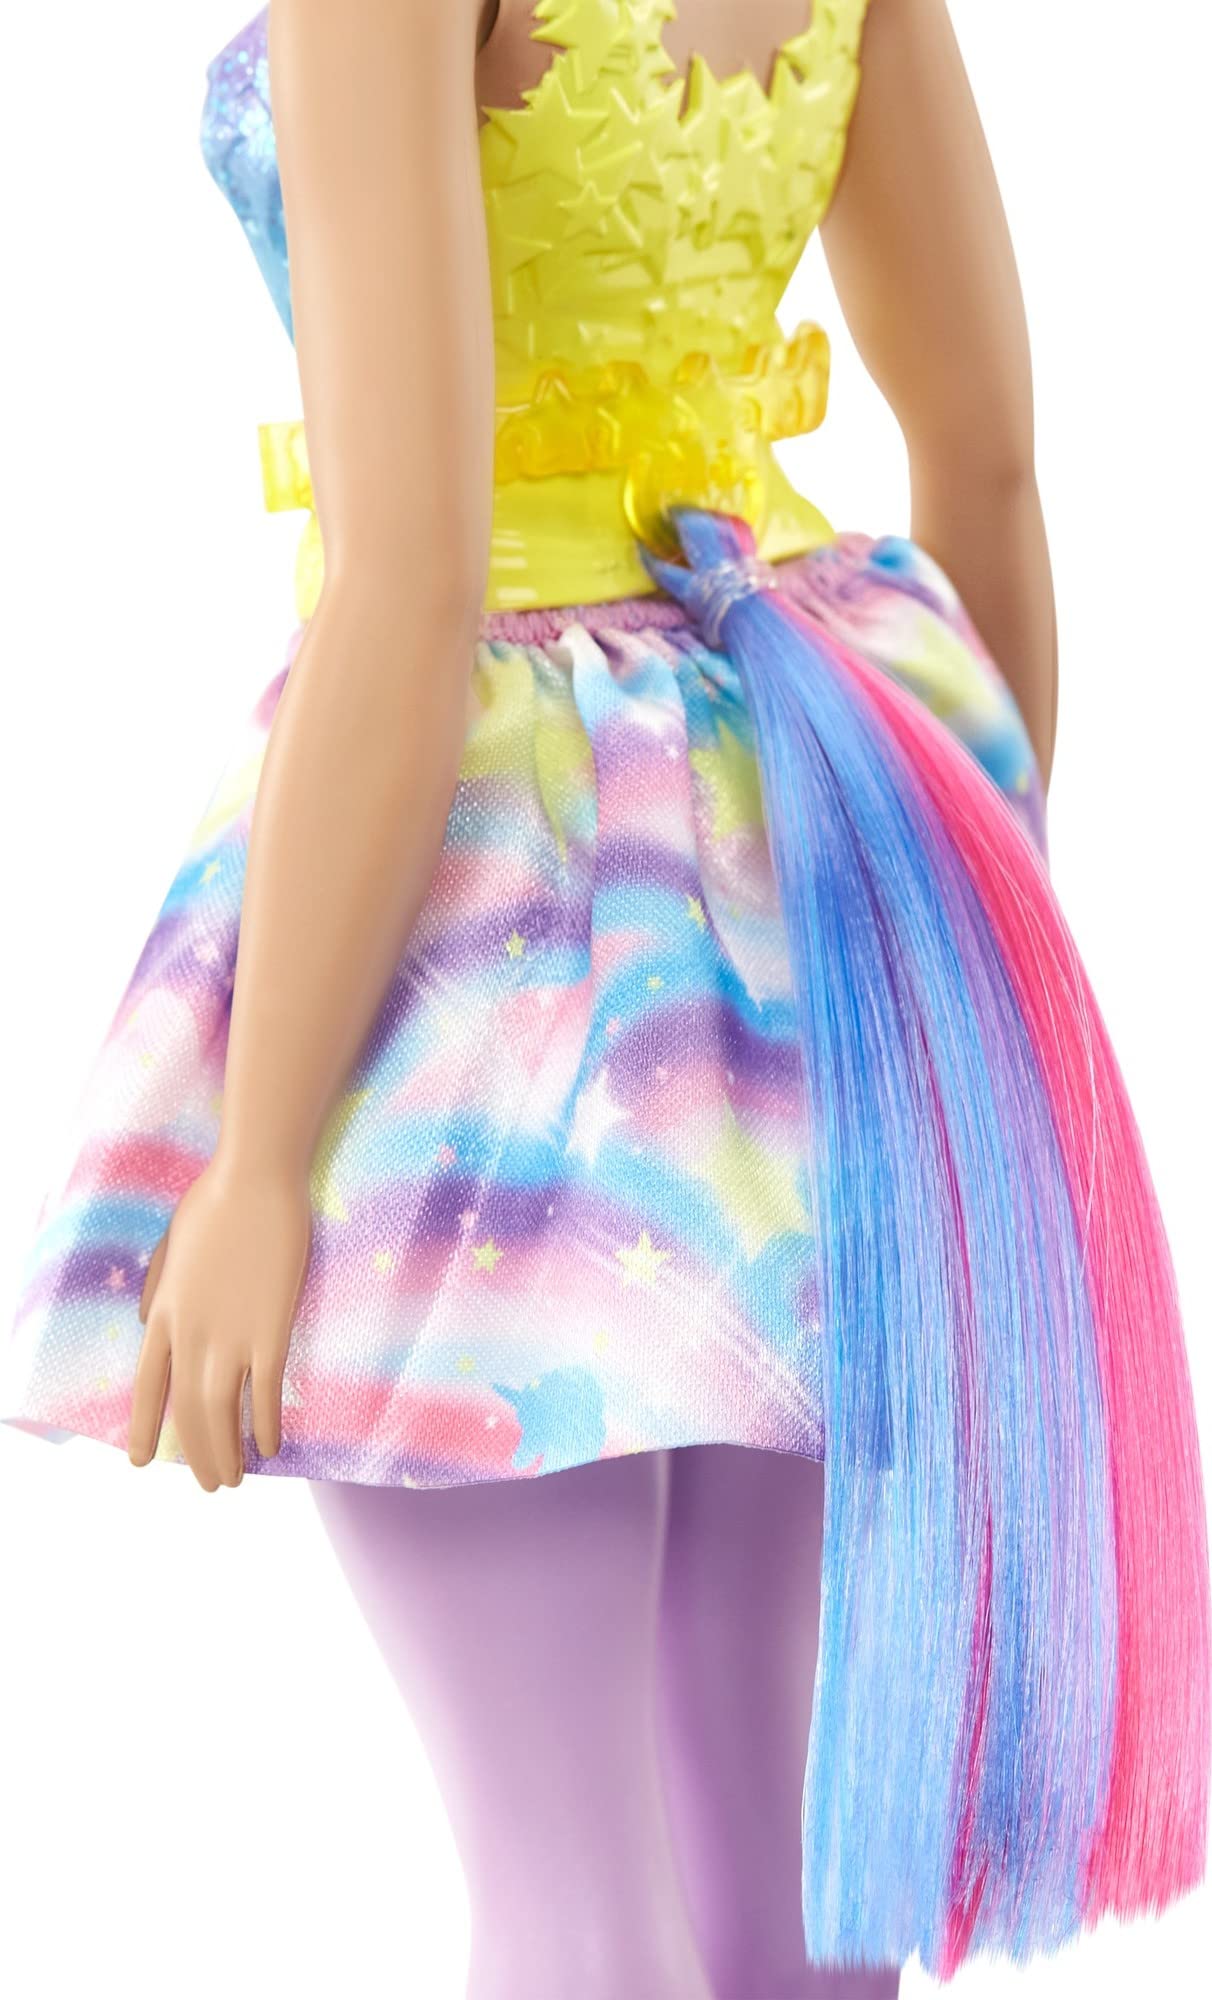 Barbie Dreamtopia Unicorn Doll with Blue and Pink Hair